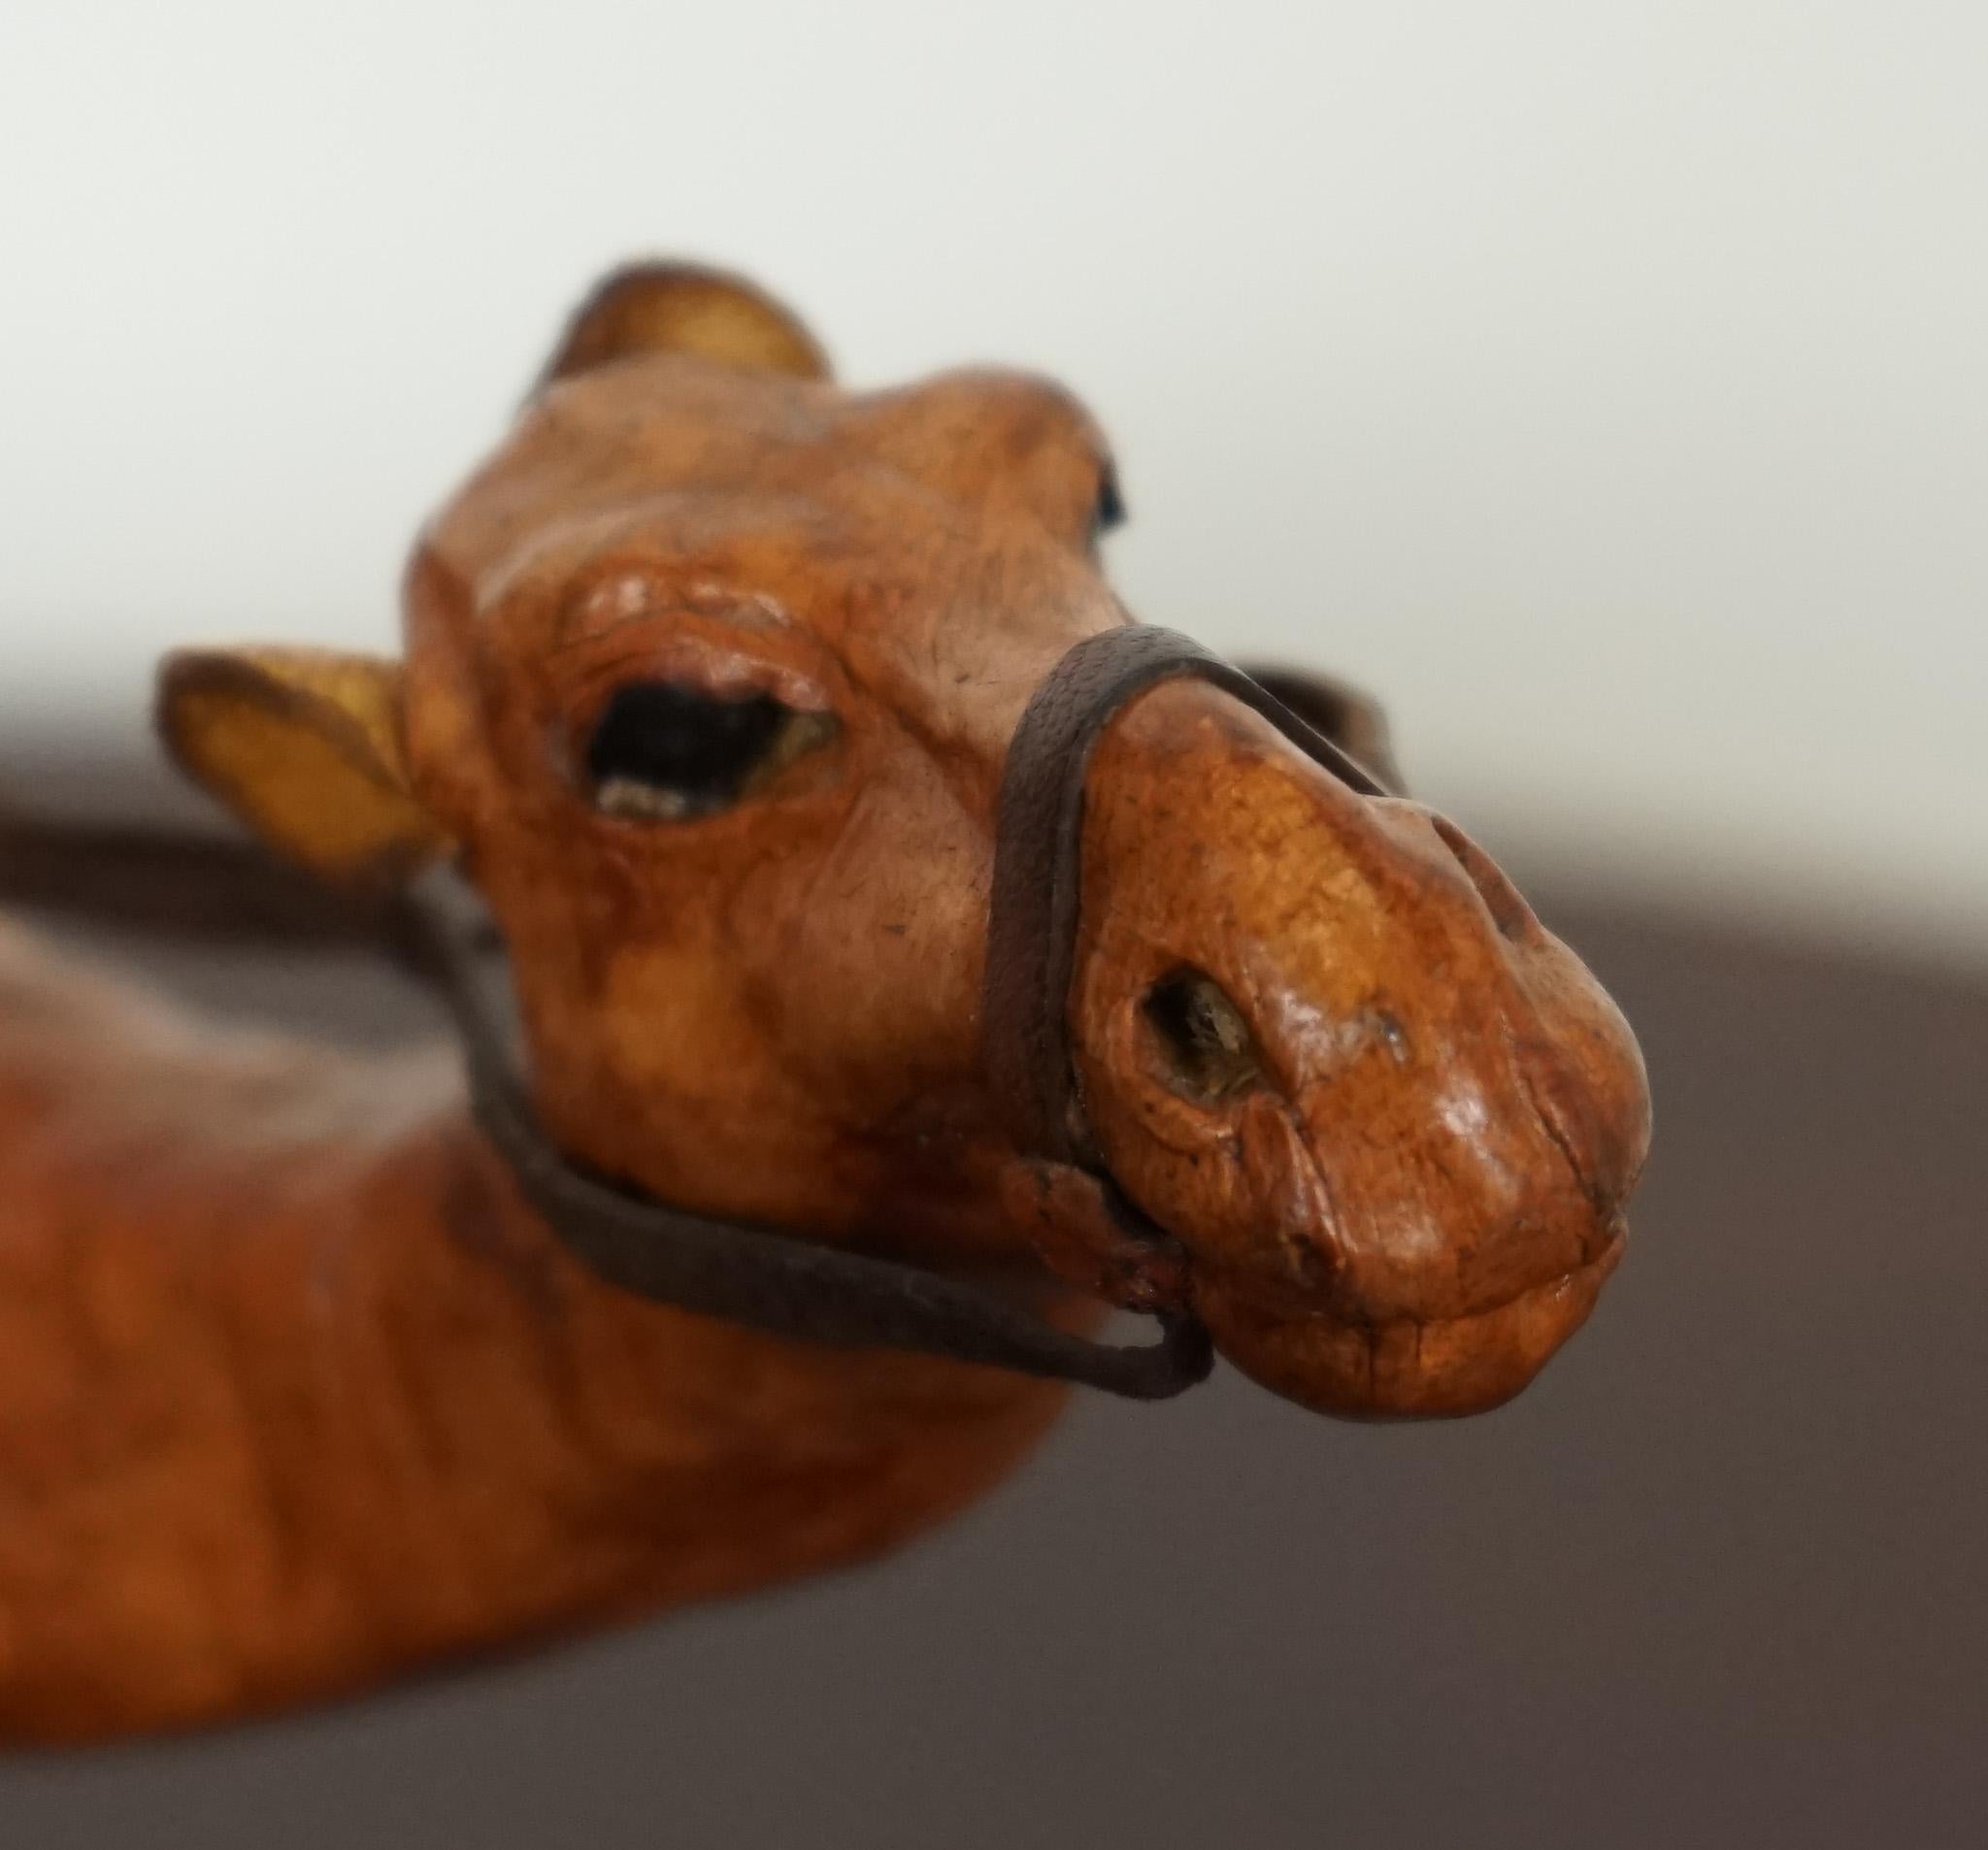 LIBERTY'S LONDON CAMEL SculPTURE WiTH LOVELY AGED LEATHER ON HAND CARved WOOD  (20. Jahrhundert) im Angebot